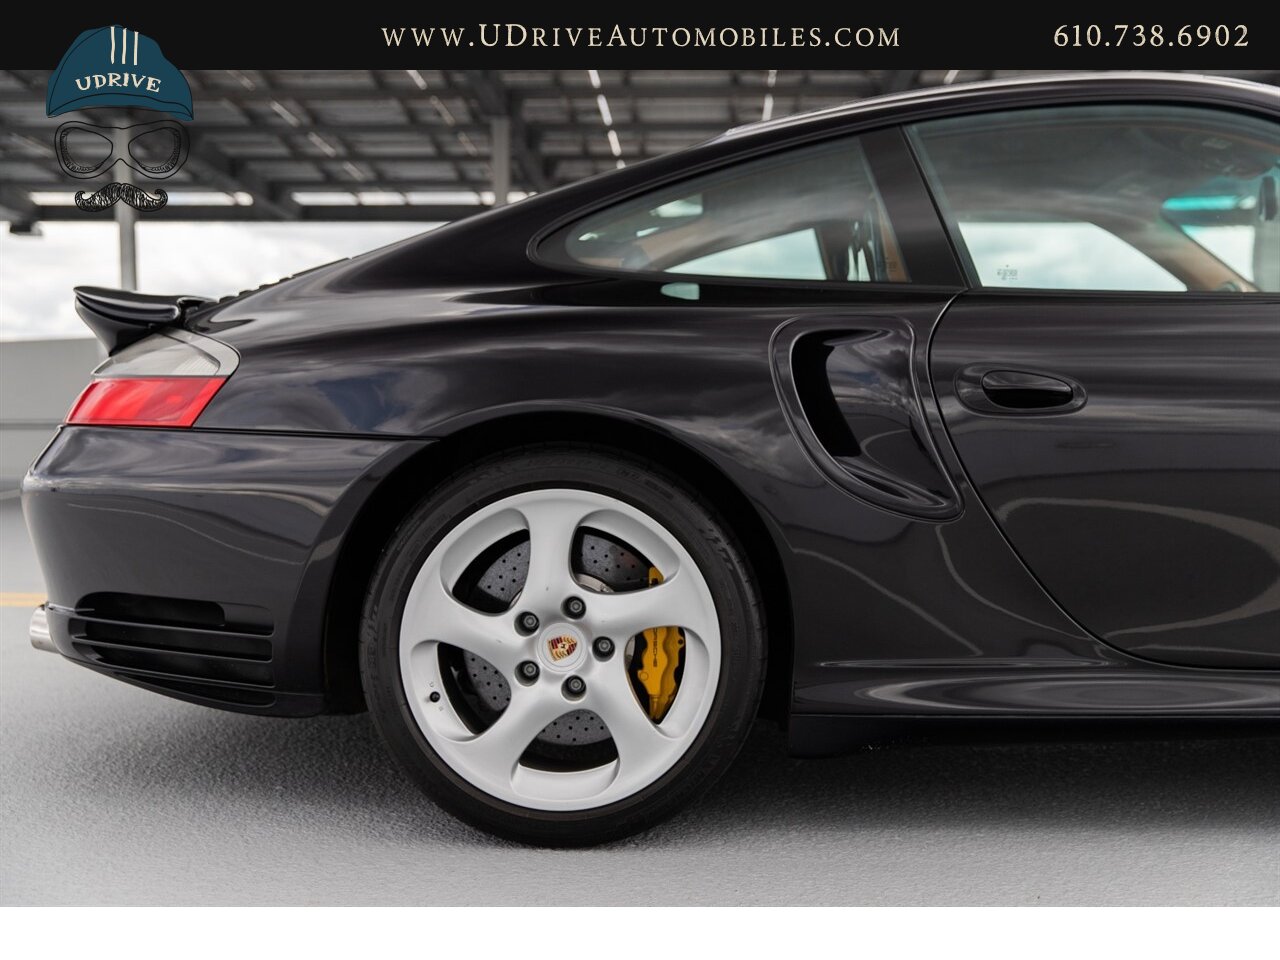 2005 Porsche 911 Turbo S 6 Speed 14k Miles Sport Sts Painted Backs  Natural Brown Lthr $144,070 MSRP - Photo 17 - West Chester, PA 19382